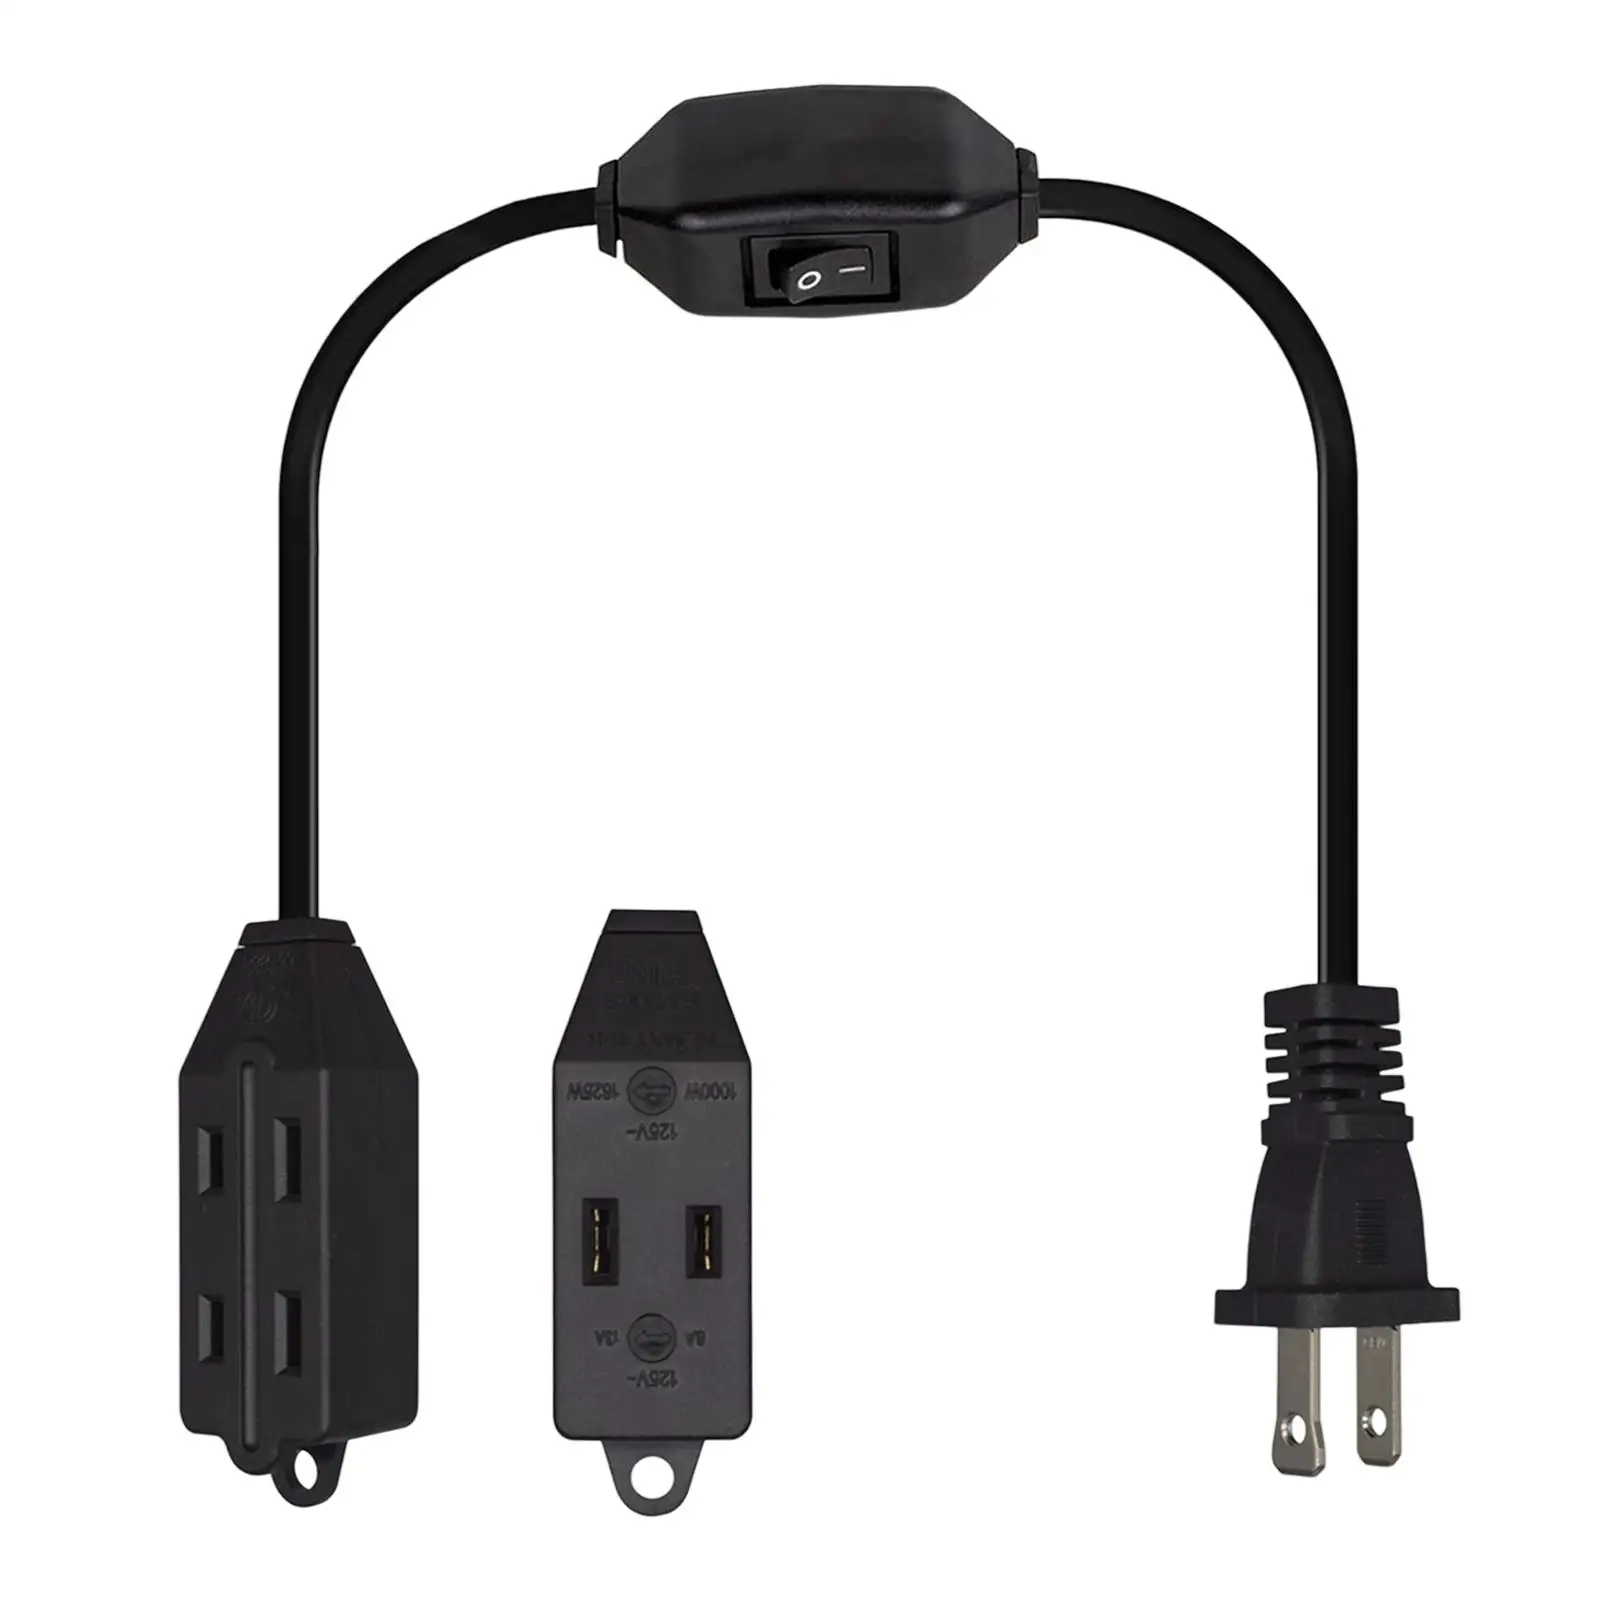 2 Prong Power Strip 1-15P to 1-15R 2 Prong to 2 Prong Outlet Adapter with 12A Switch 3 Outlet Extension Cord for Home Outdoor